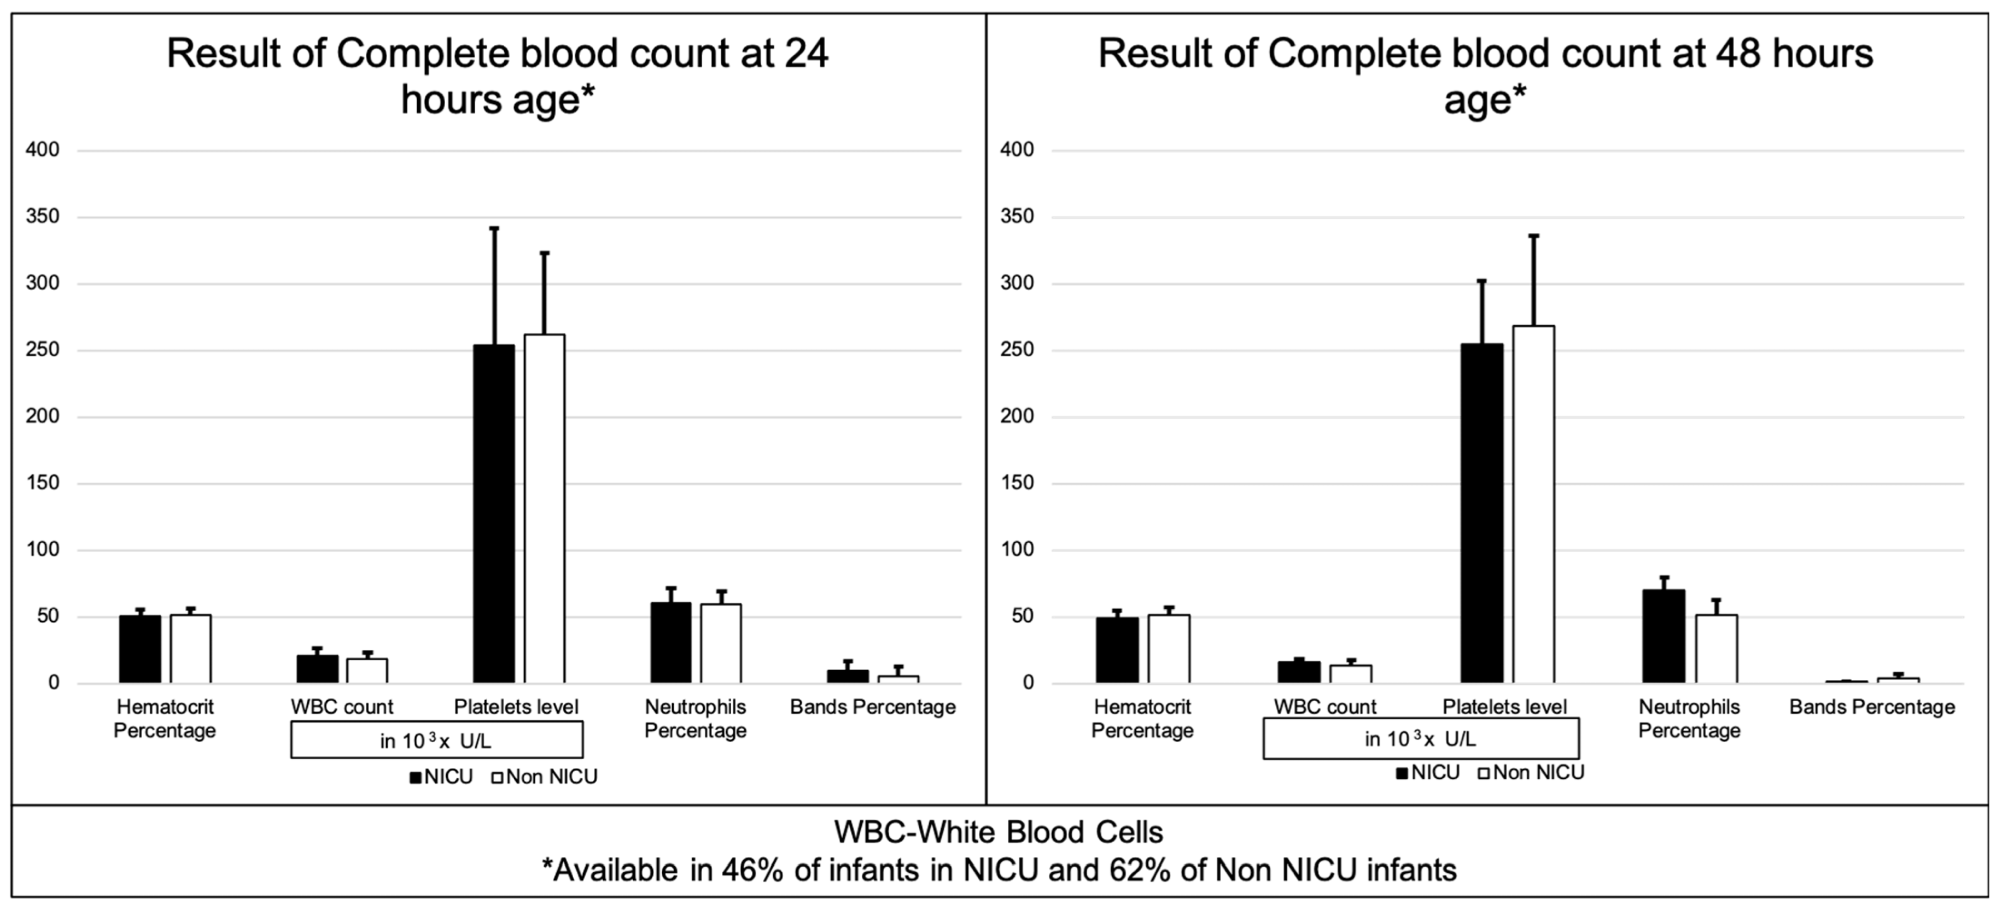 Complete blood count results after 24 and 48 hours.